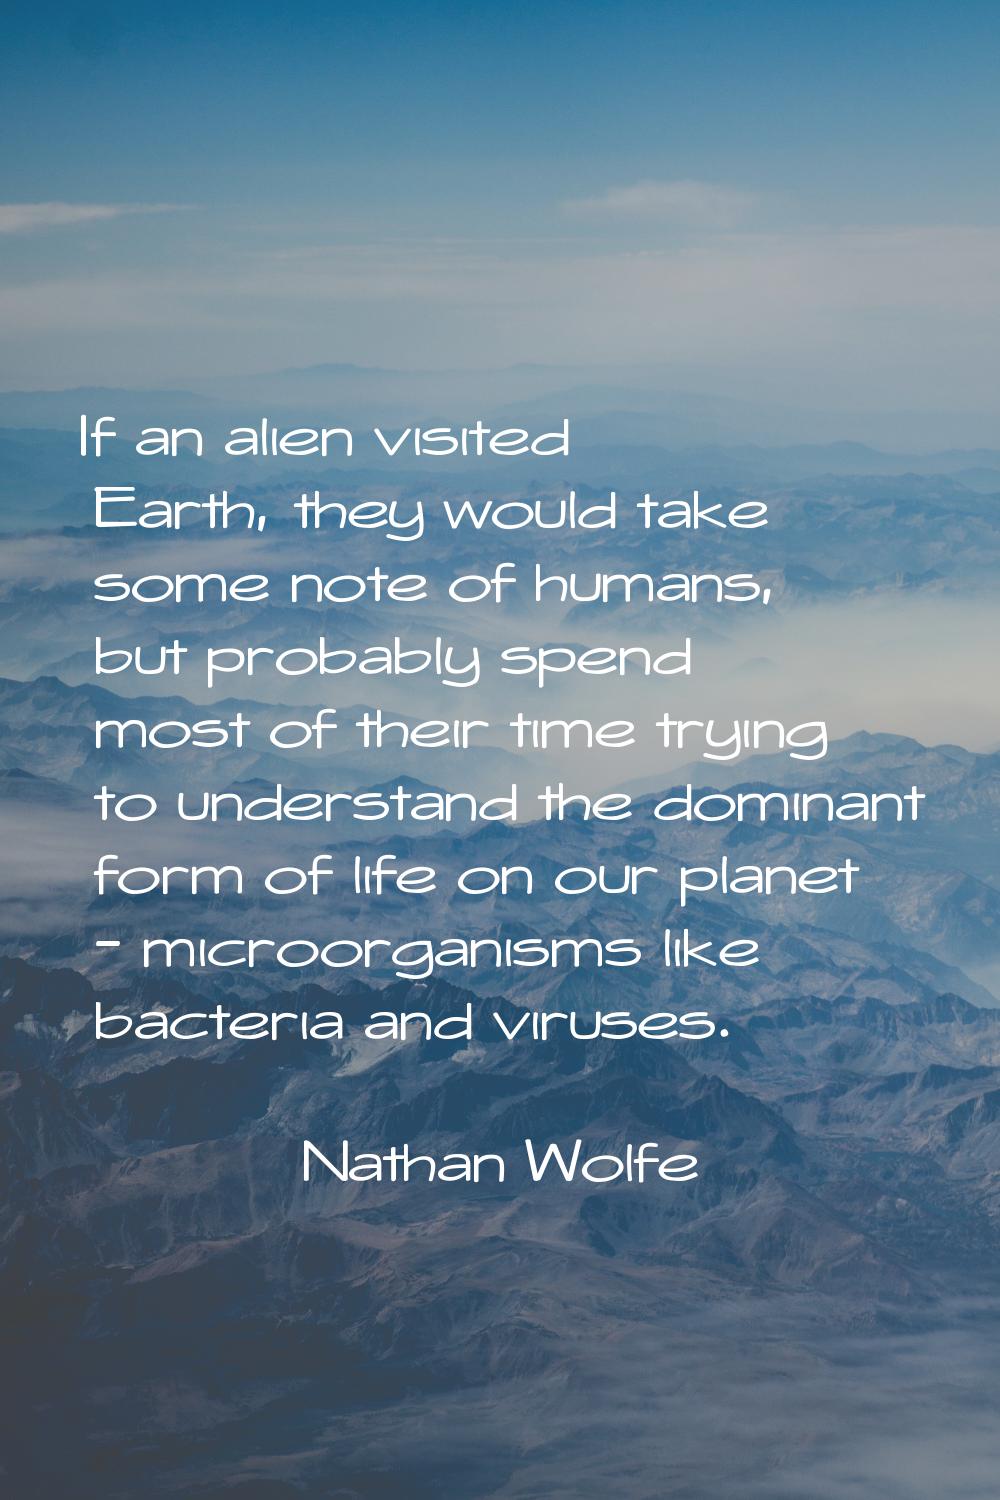 If an alien visited Earth, they would take some note of humans, but probably spend most of their ti